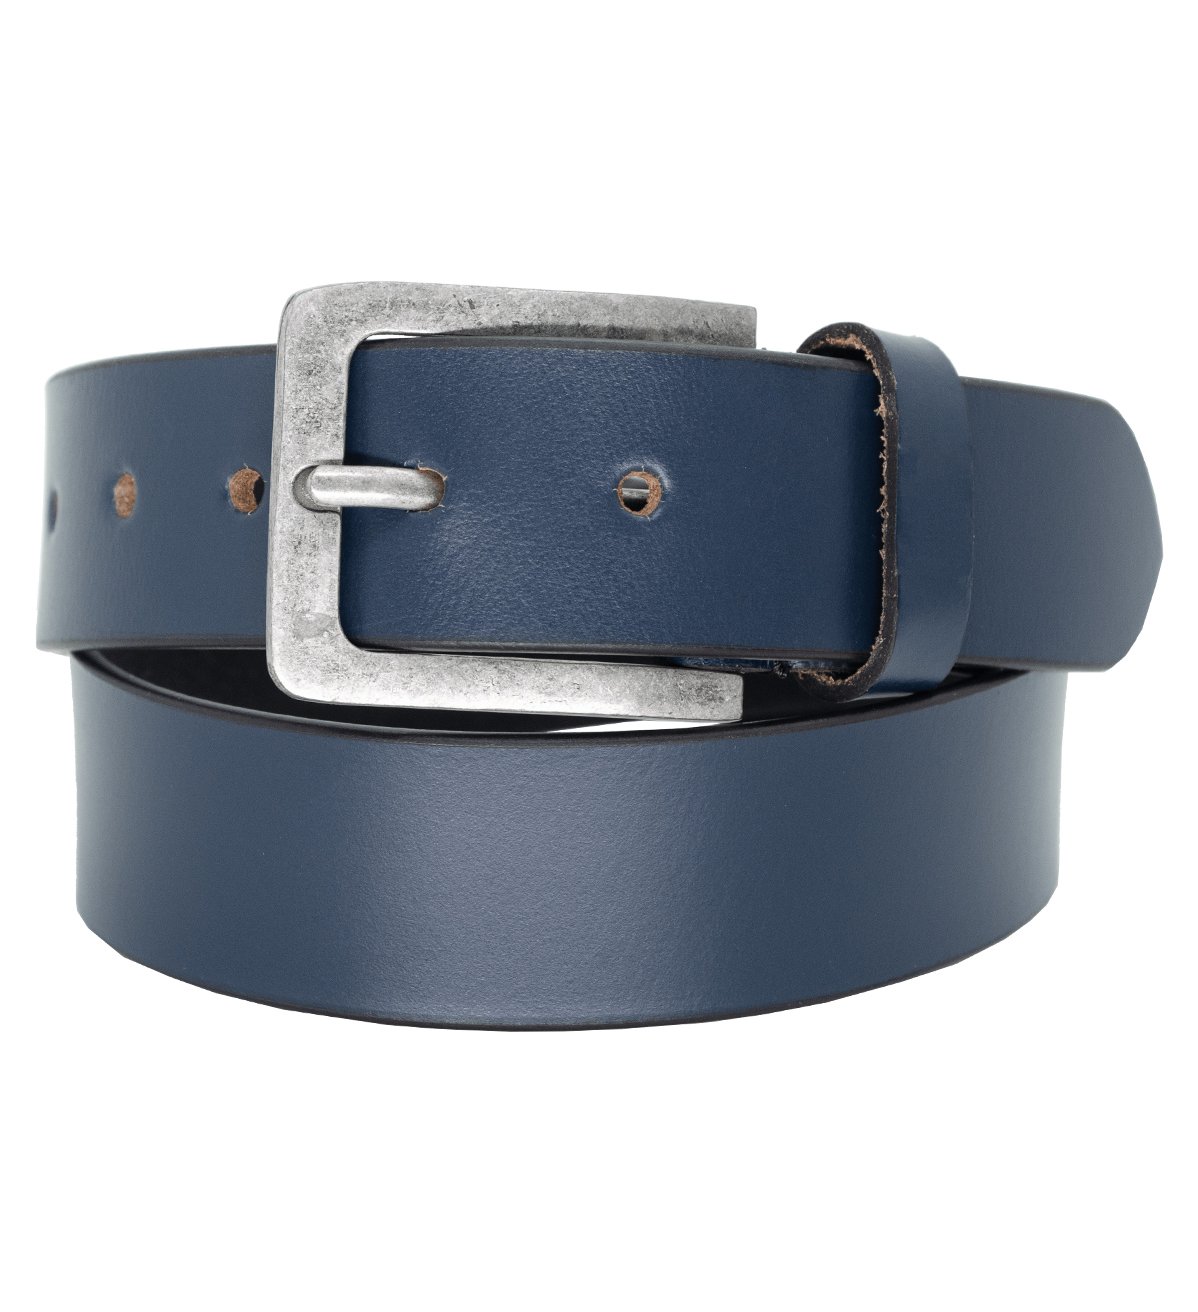 Men's Casual Genuine Leather Belt with Antique Silver Buckle - #BT-1552